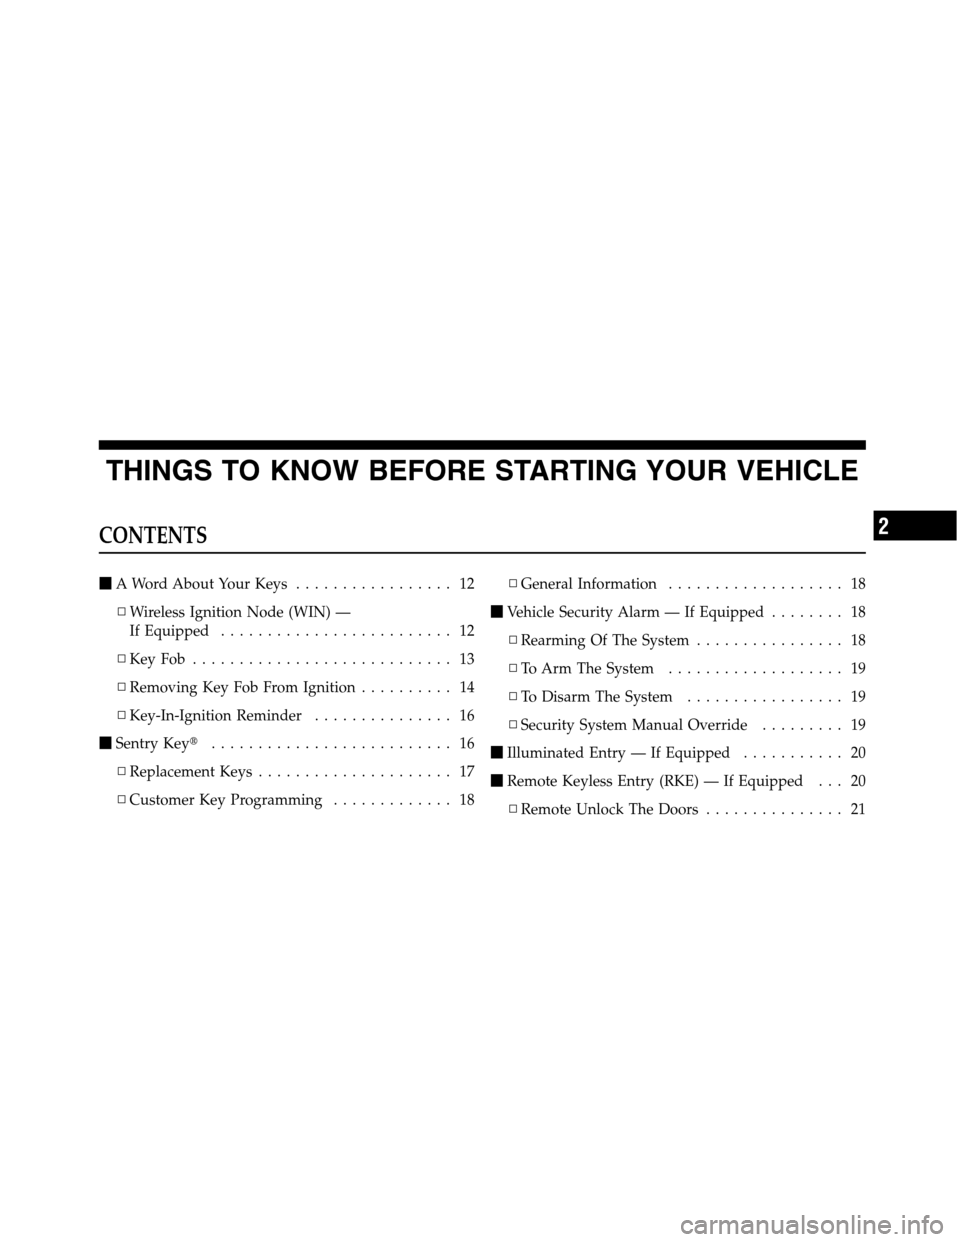 Ram 5500 Chassis Cab 2012  Owners Manual THINGS TO KNOW BEFORE STARTING YOUR VEHICLE
CONTENTS
A Word About Your Keys................. 12
▫Wireless Ignition Node (WIN) —
If Equipped......................... 12
▫KeyFob .................